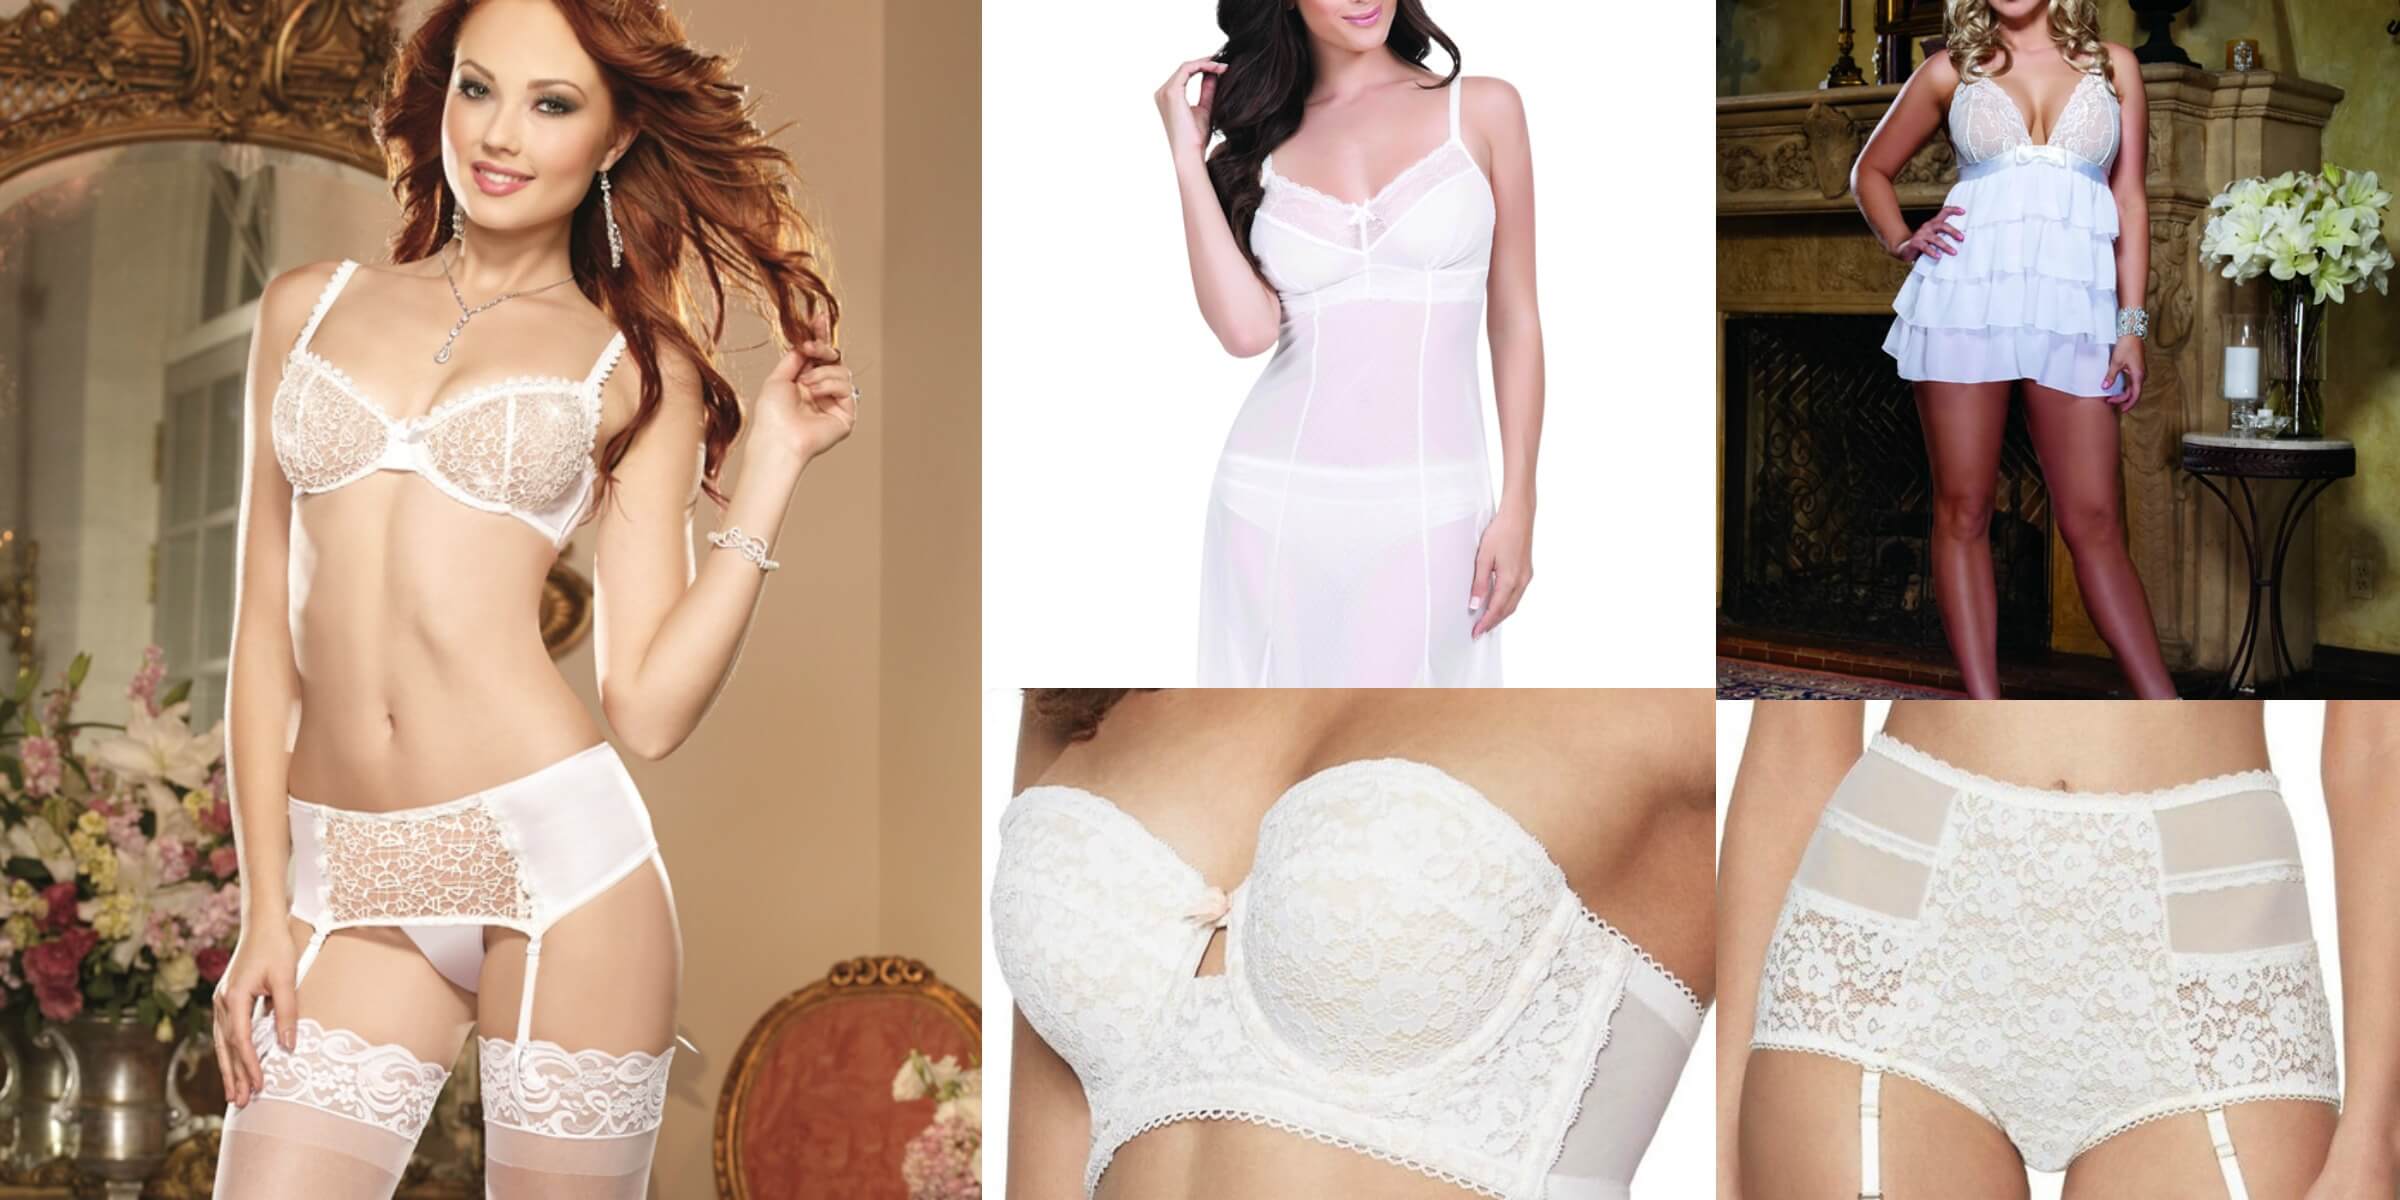 Far left: Beautiful Bride Bra Set by Dreamgirl Lingerie; Top Middle: Charlize Lace Chemise by Affinitas Intimates; Top Right: Bridal Bliss Ruffled Chiffon Babydoll and Thong Set in Plus Size by Dreamgirl; Bottom Middle: Fanciful Convertible Longline Strapless Bra by Blush Lingerie; Bottom Right: Fanciful Floral Lace Retro-Brief by Blush Lingerie